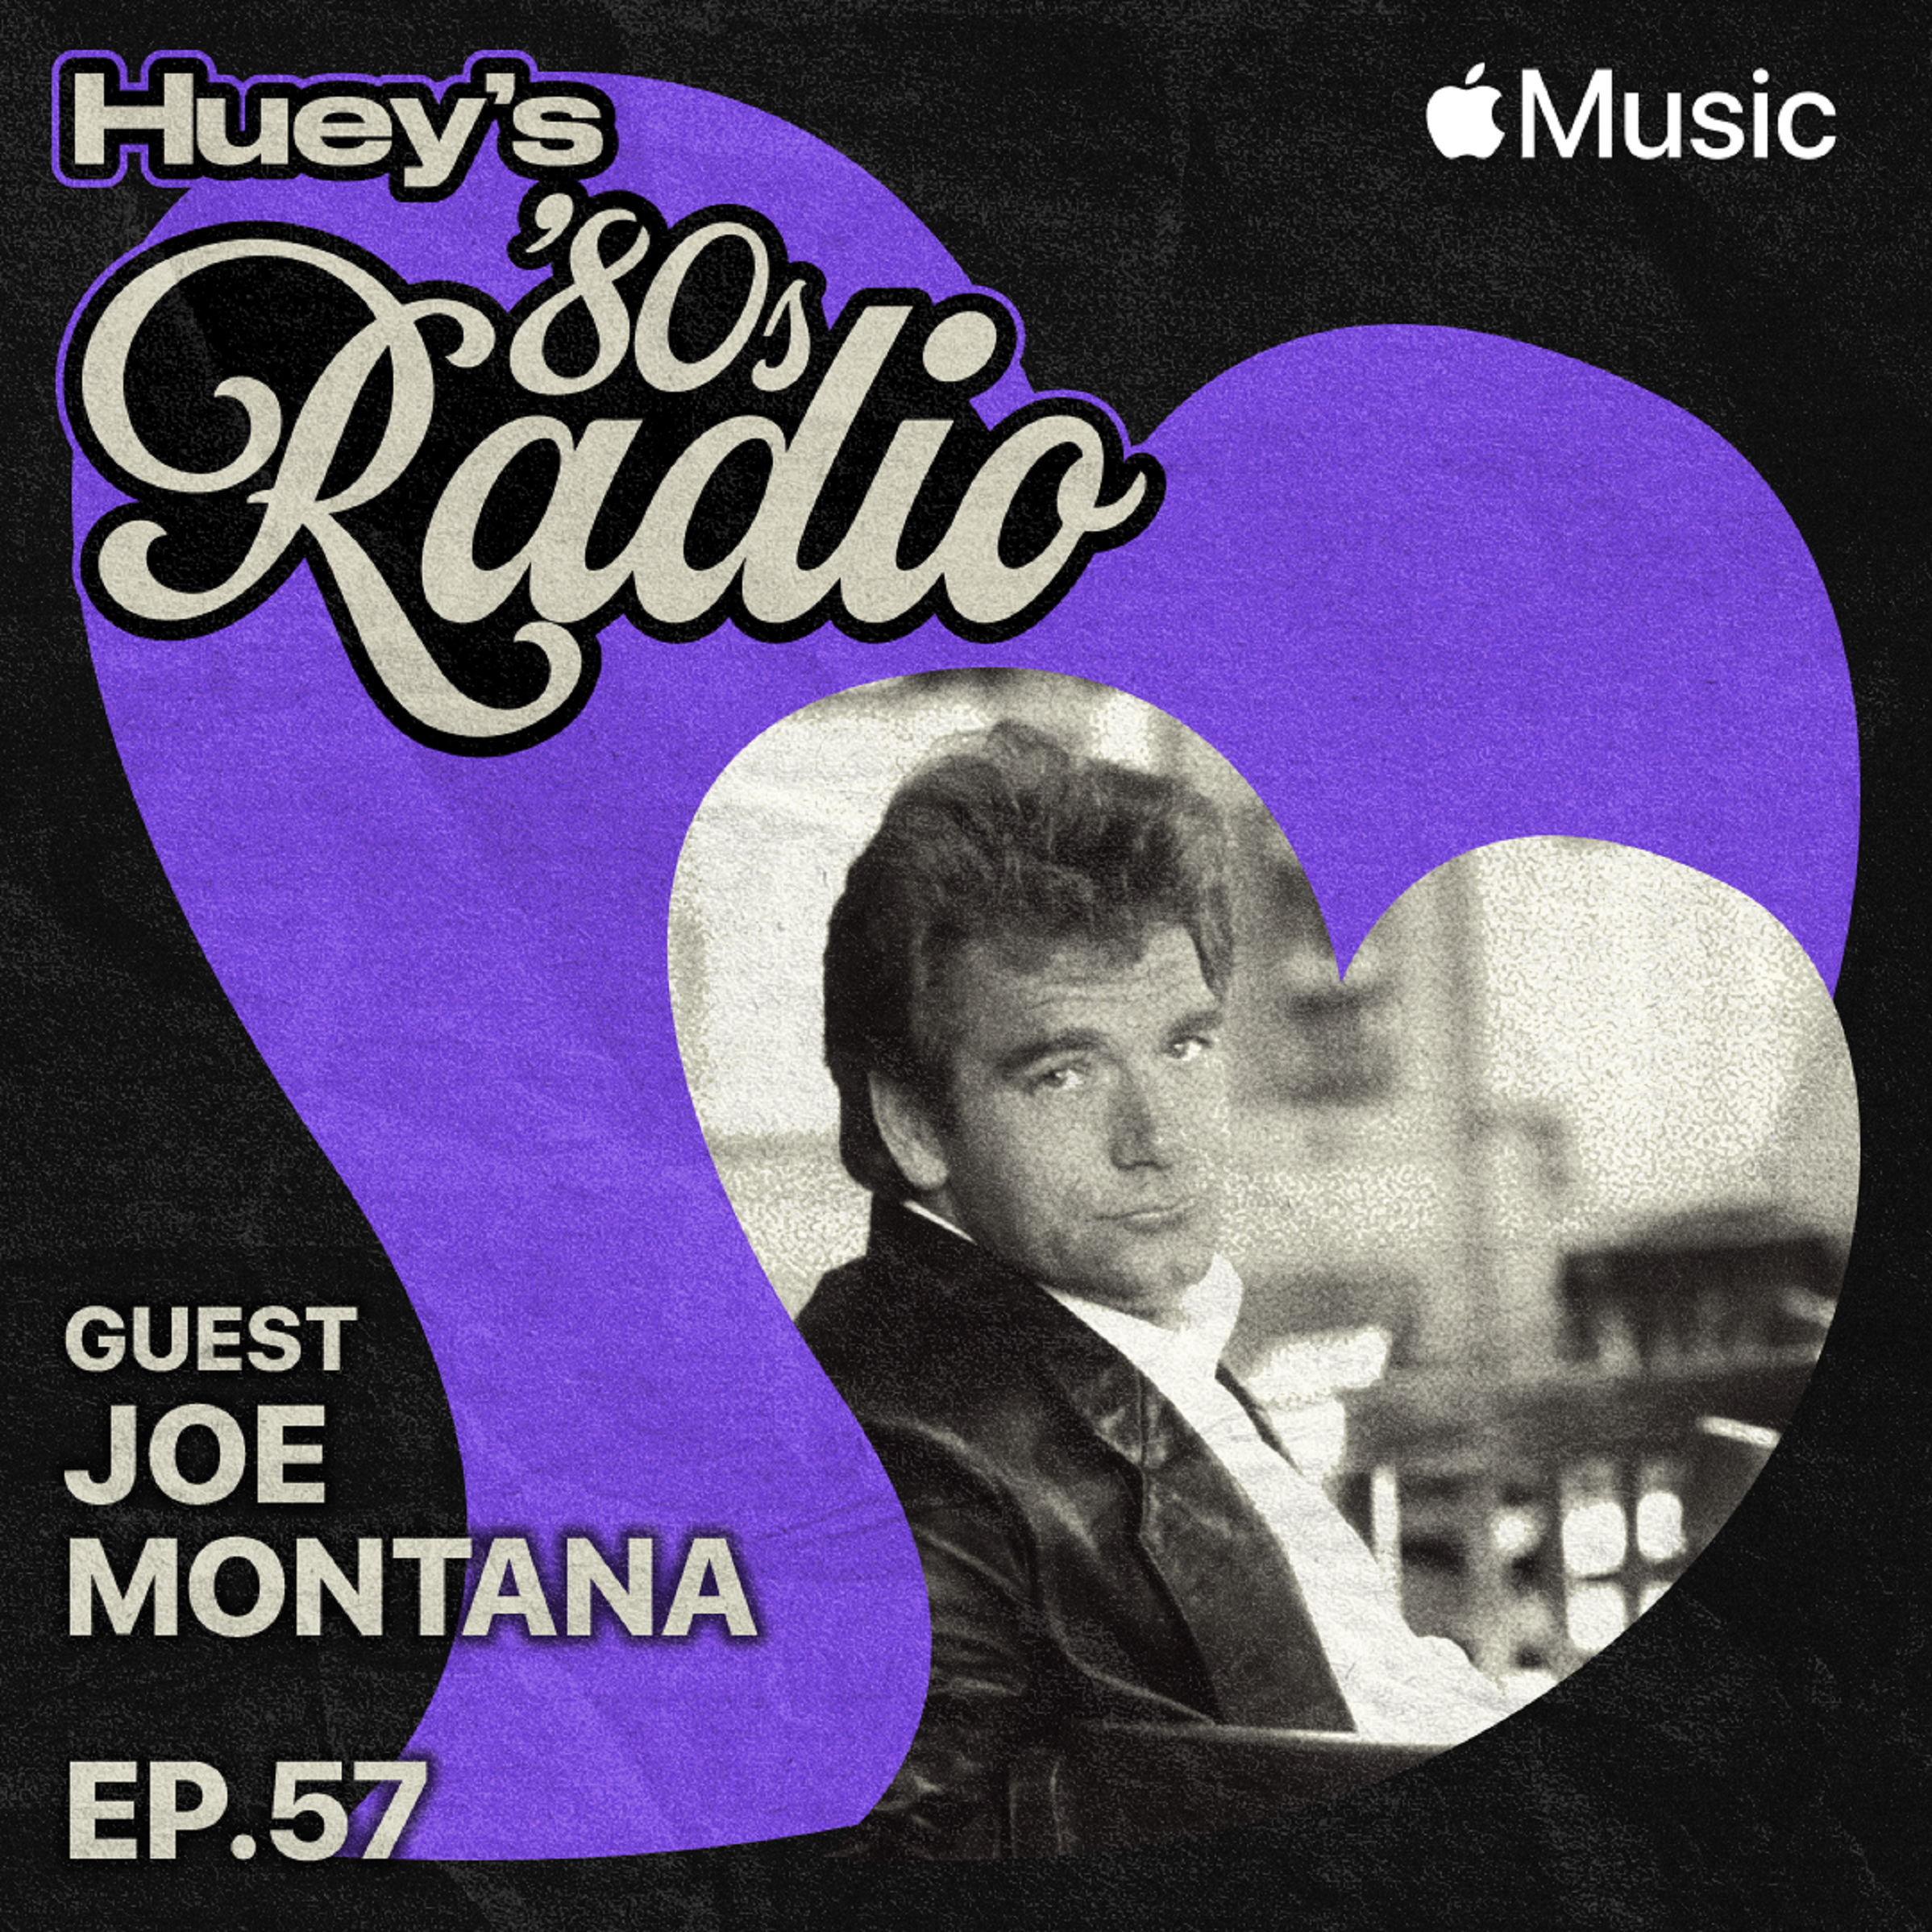 Joe Montana Tells Apple Music About A Memorable Encounter With Journey, Singing "Hip To Be Square" For Huey Lewis, His Love For Whitney Houston And More...